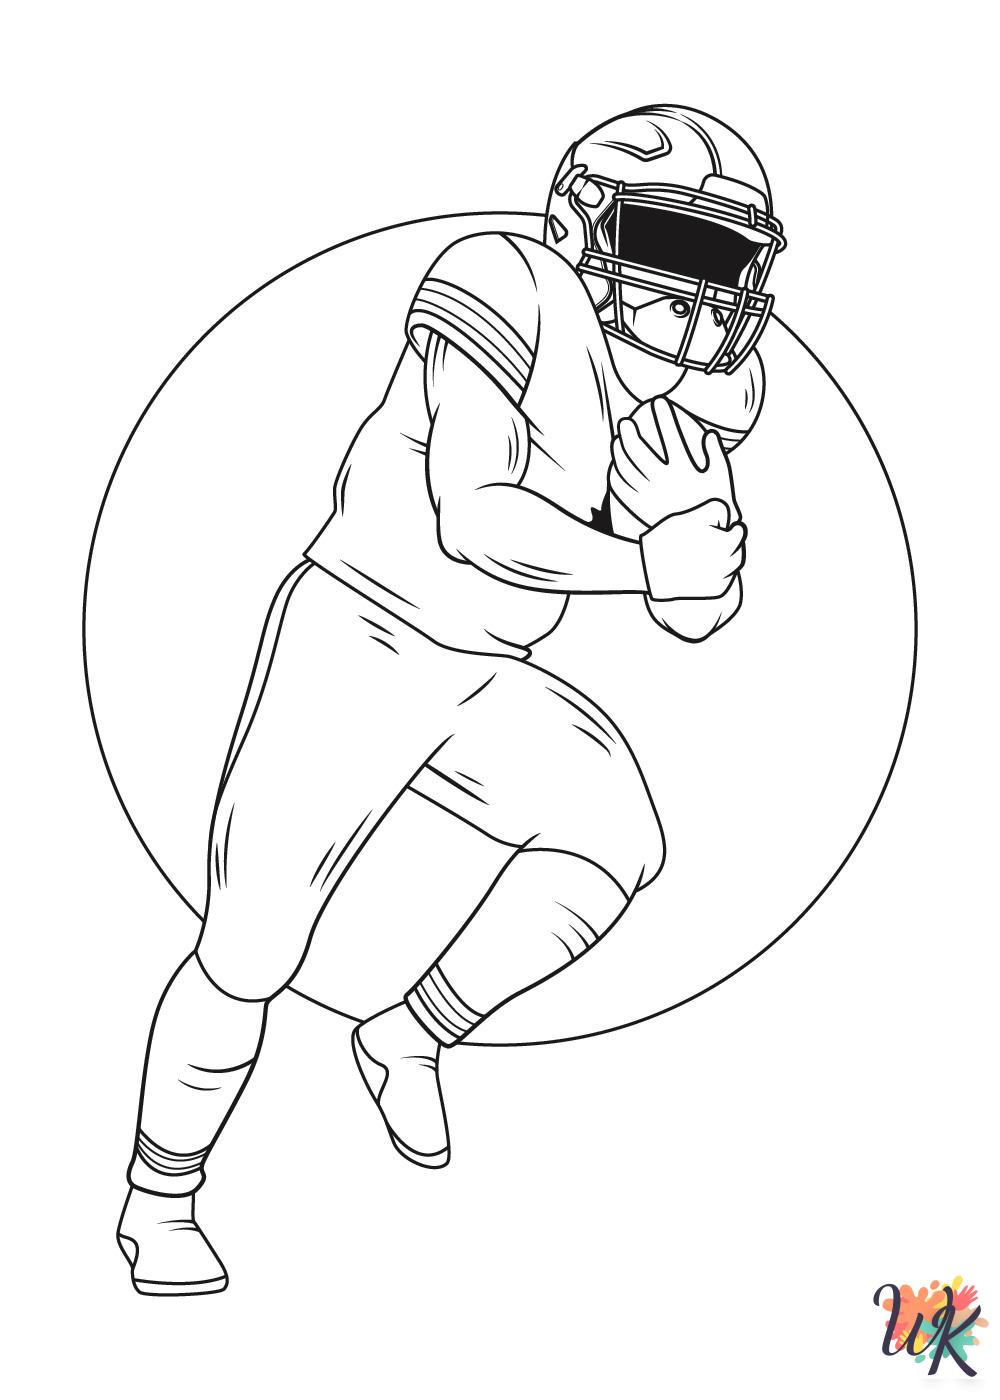 NFL Coloring Pages 4